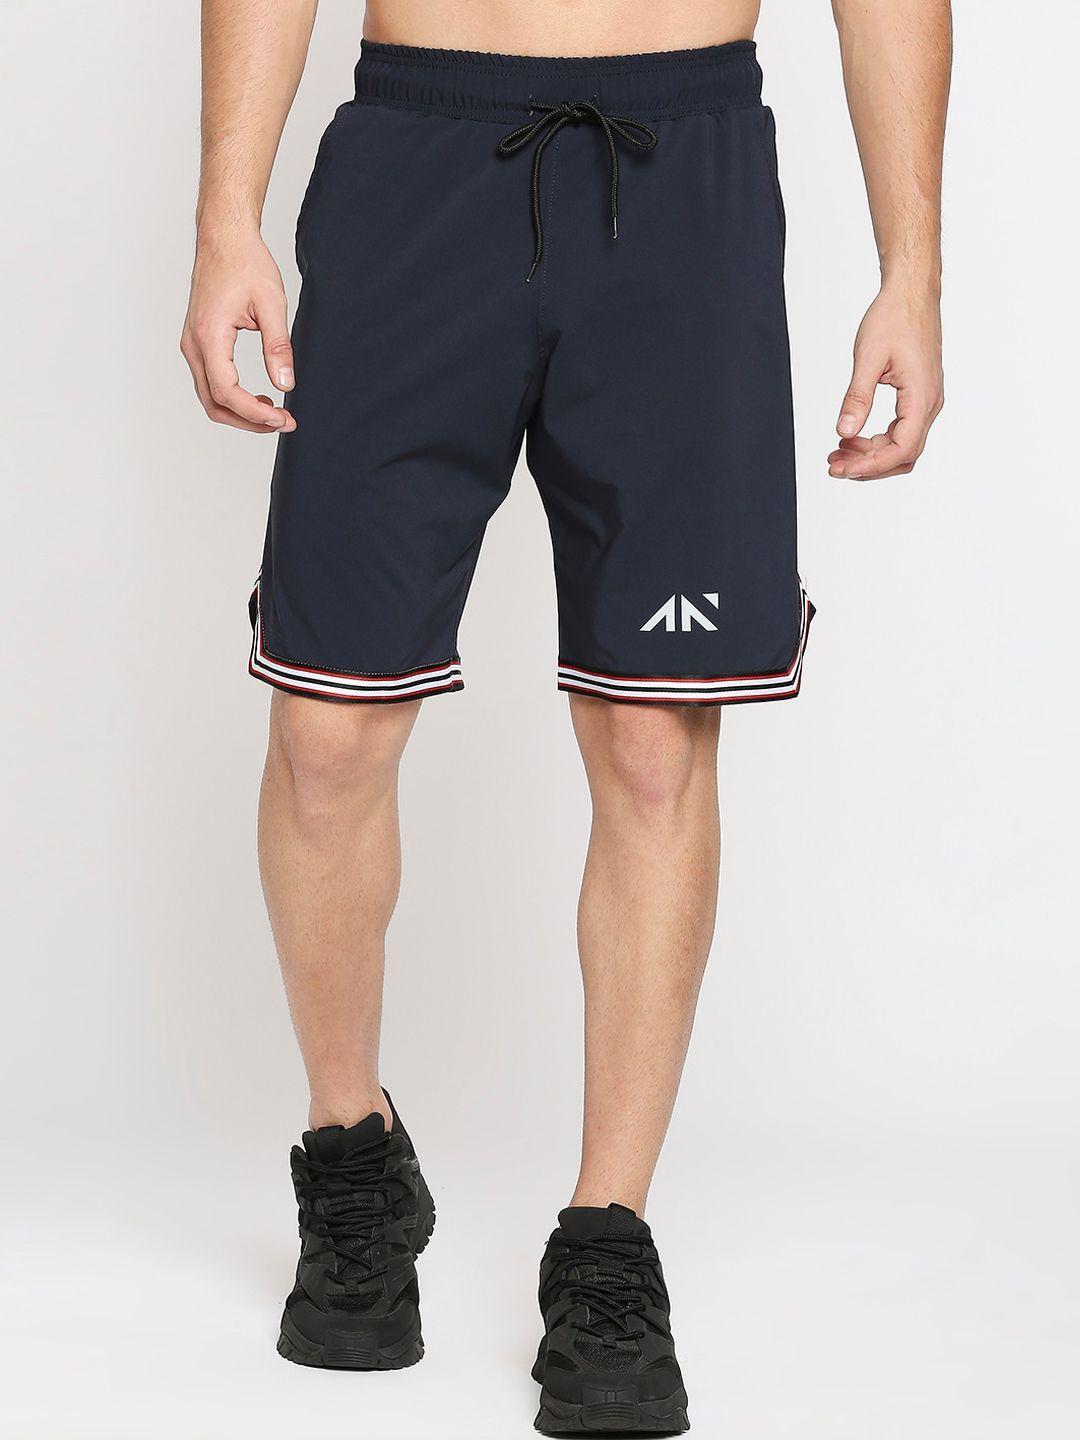 aesthetic nation men navy blue loose fit training or gym sports shorts